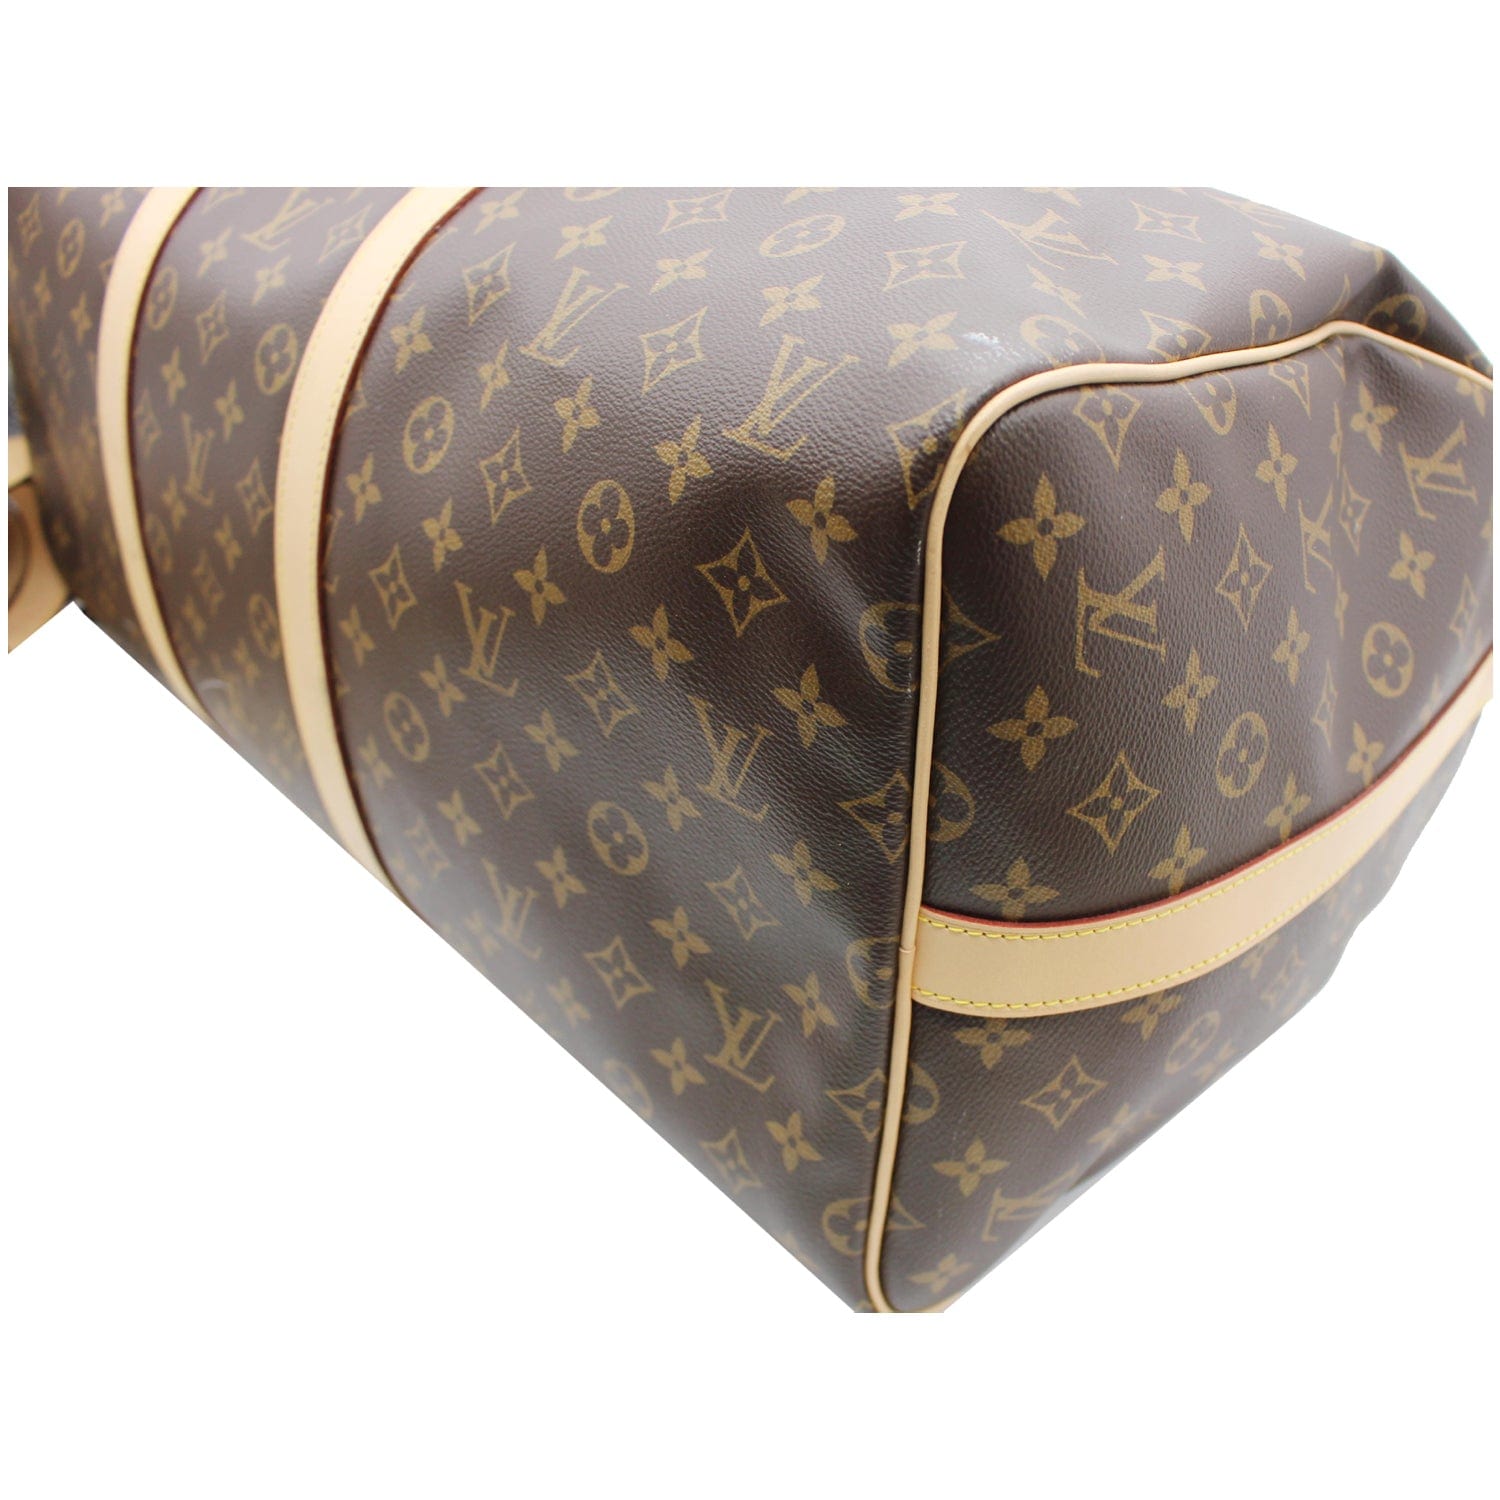 LOUIS VUITTON. 3 bags, keepall bandoulièr 60 and 55, Sac Plat Tote inside  covered in beige leather, monogram canvas, details and buckles in  gold-colored metal, indistinct serial numbers, production around the 80s.